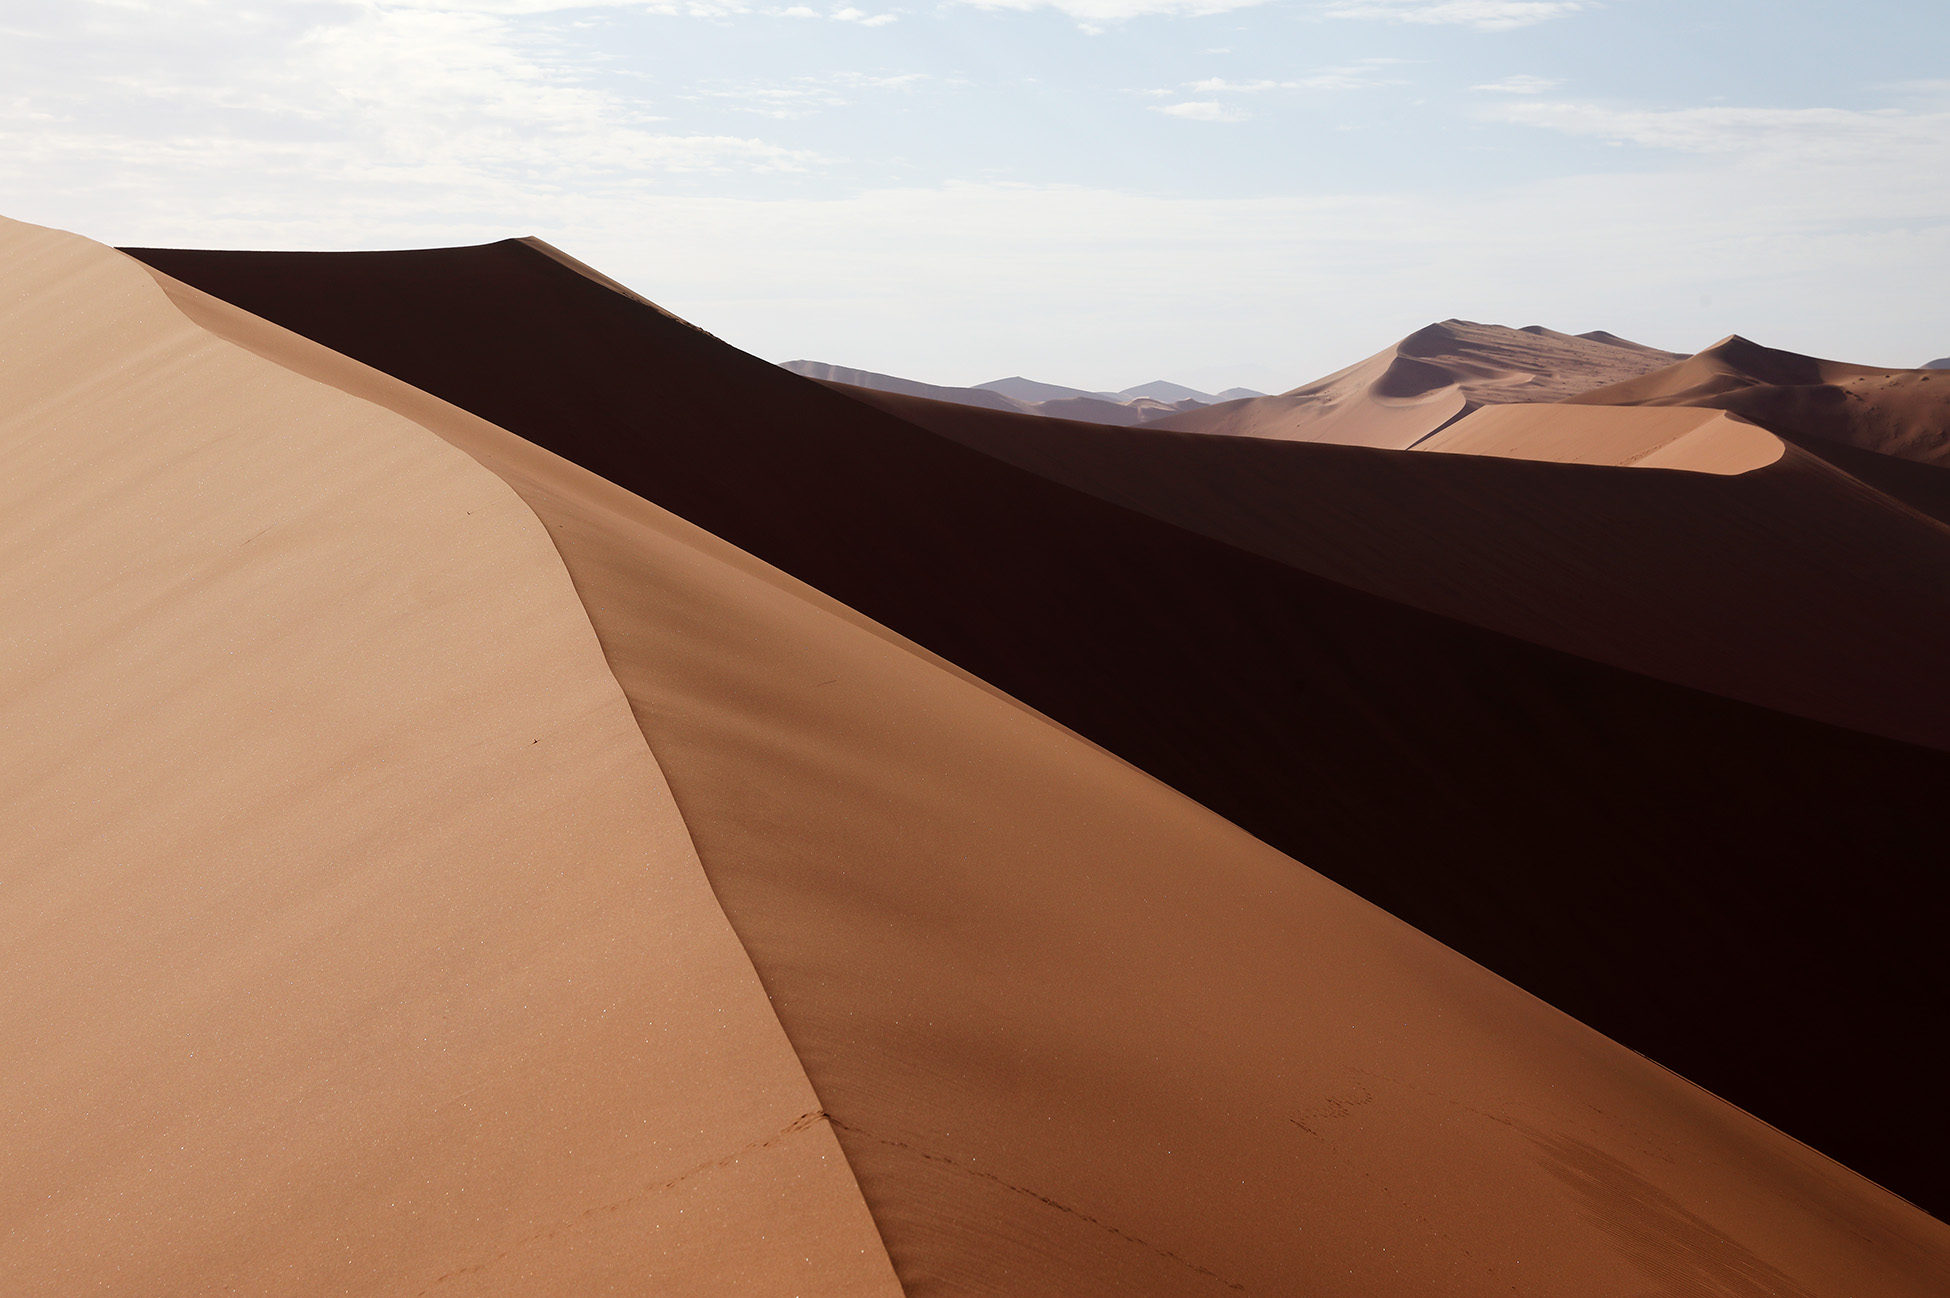 The sand dunes in the Namib are dynamic and change shape with the wind. The dunes around the Sossusvlei area are known as “star dunes” due to the wind shaping them from all directions.